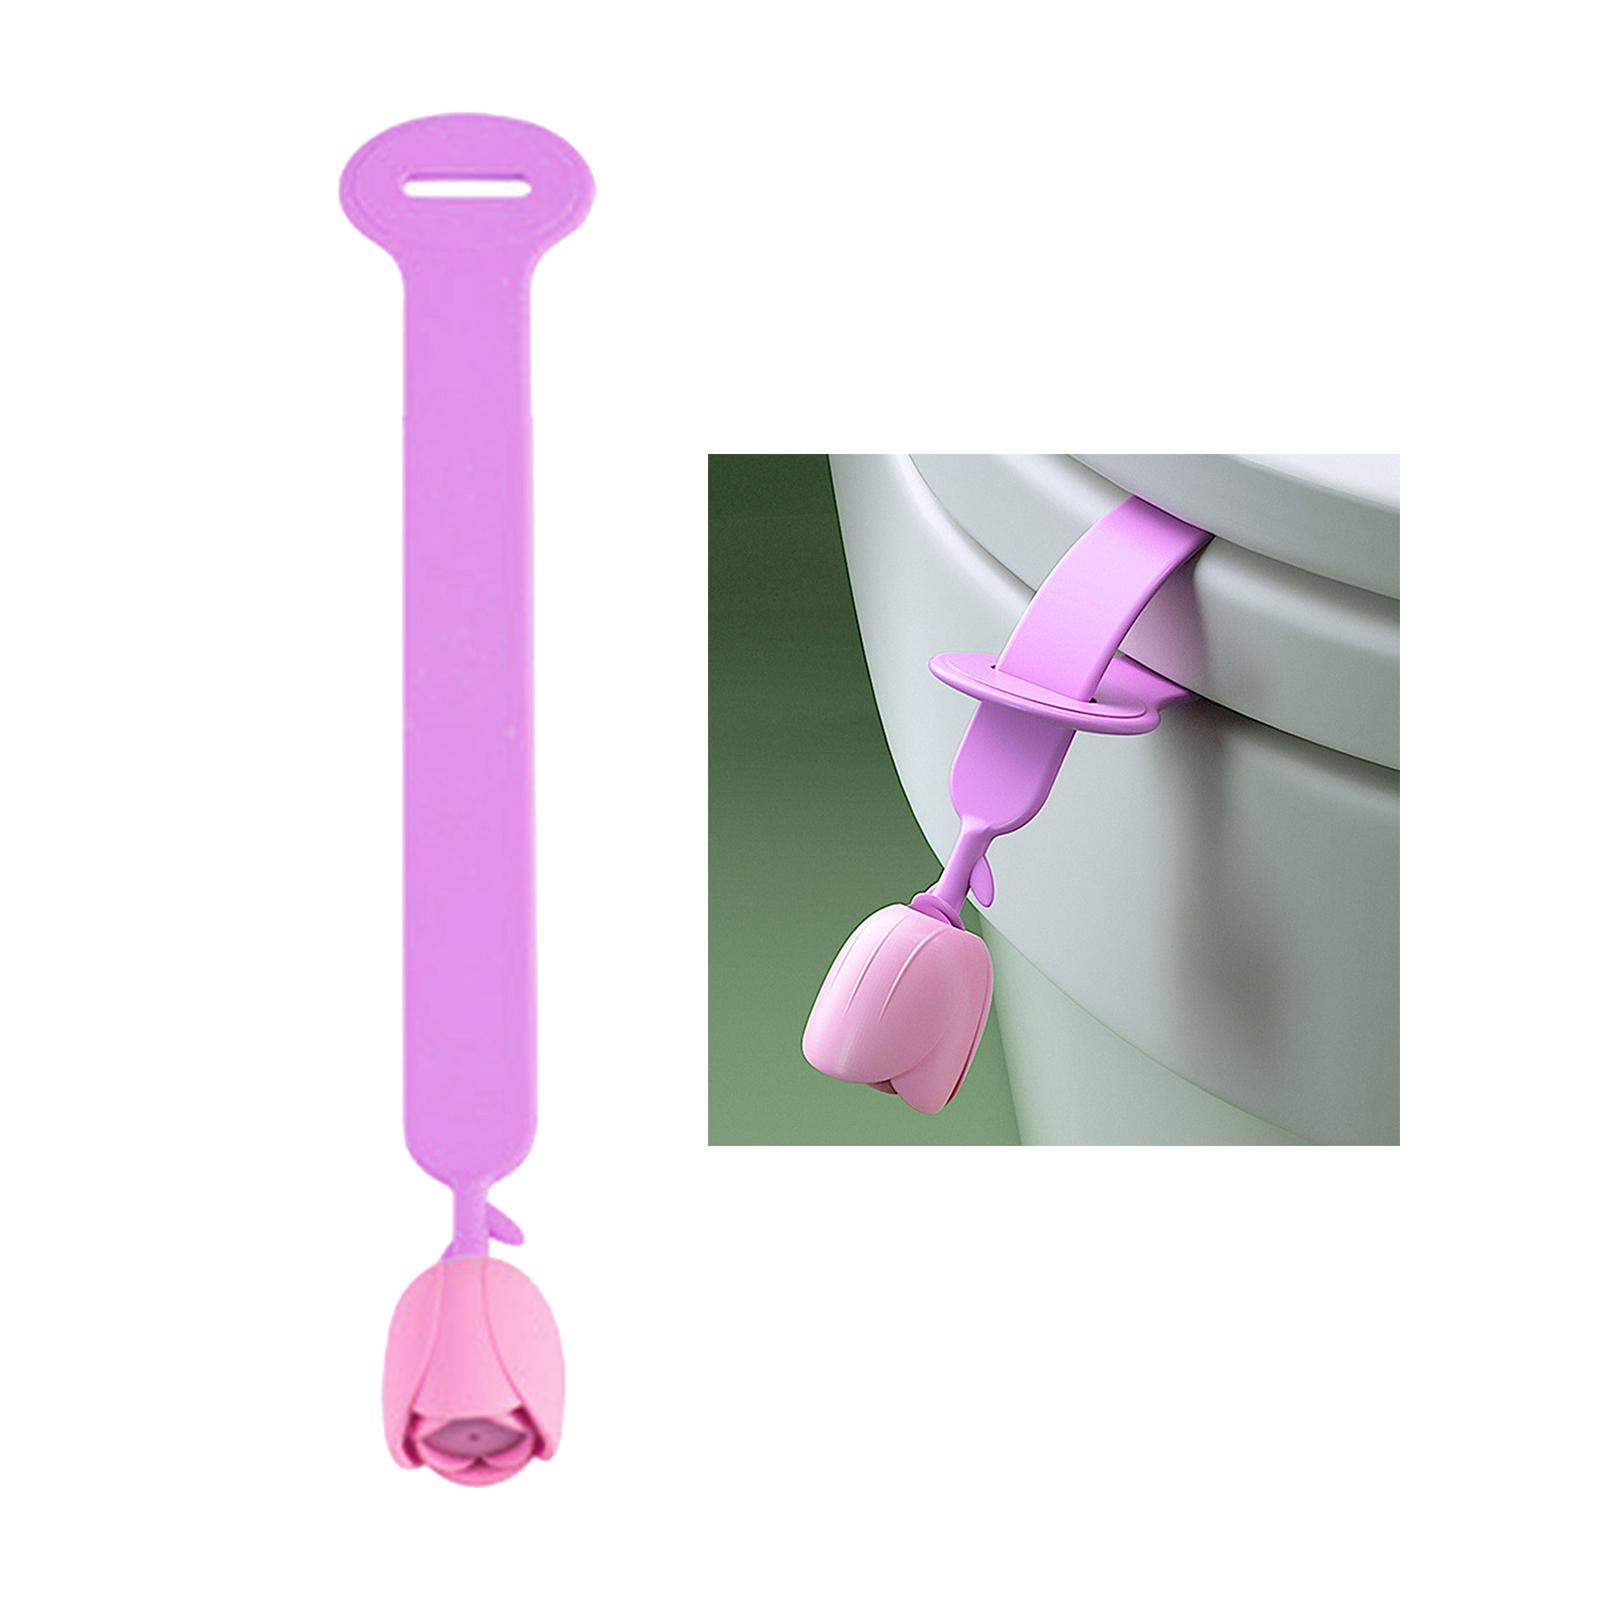 Floral Toilet Cover Lifter Avoid Touching Portable Lift Tool for Office Violet Seat Lifter